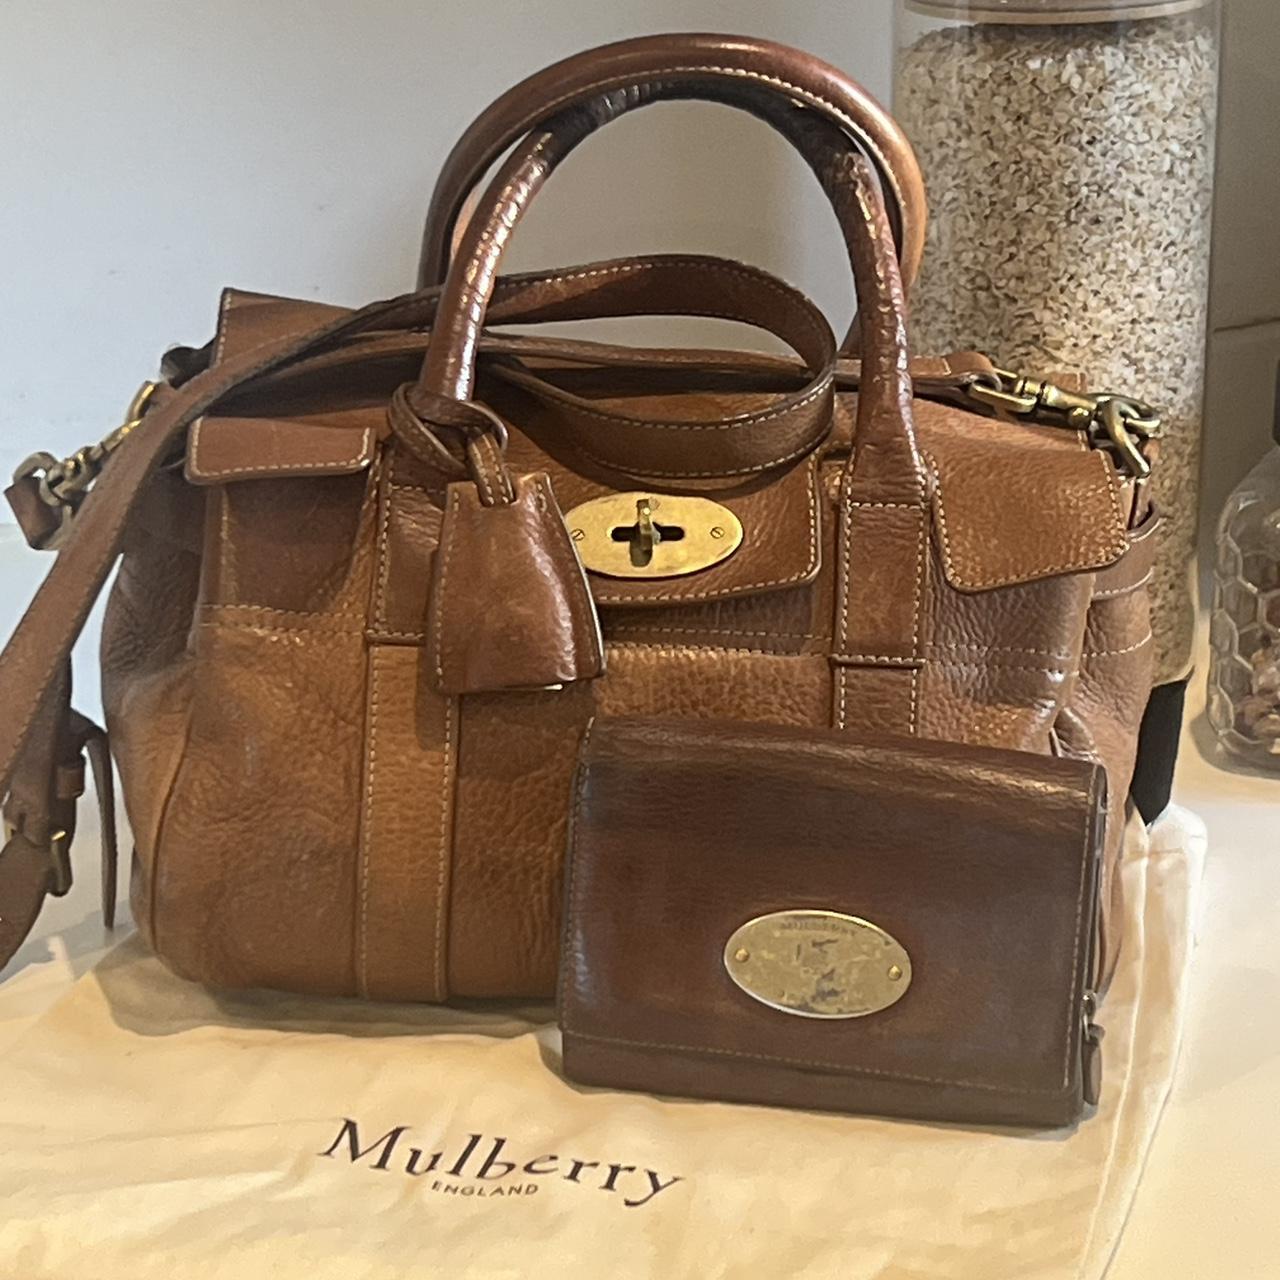 Mulberry Lily Handbag Review - YouTube